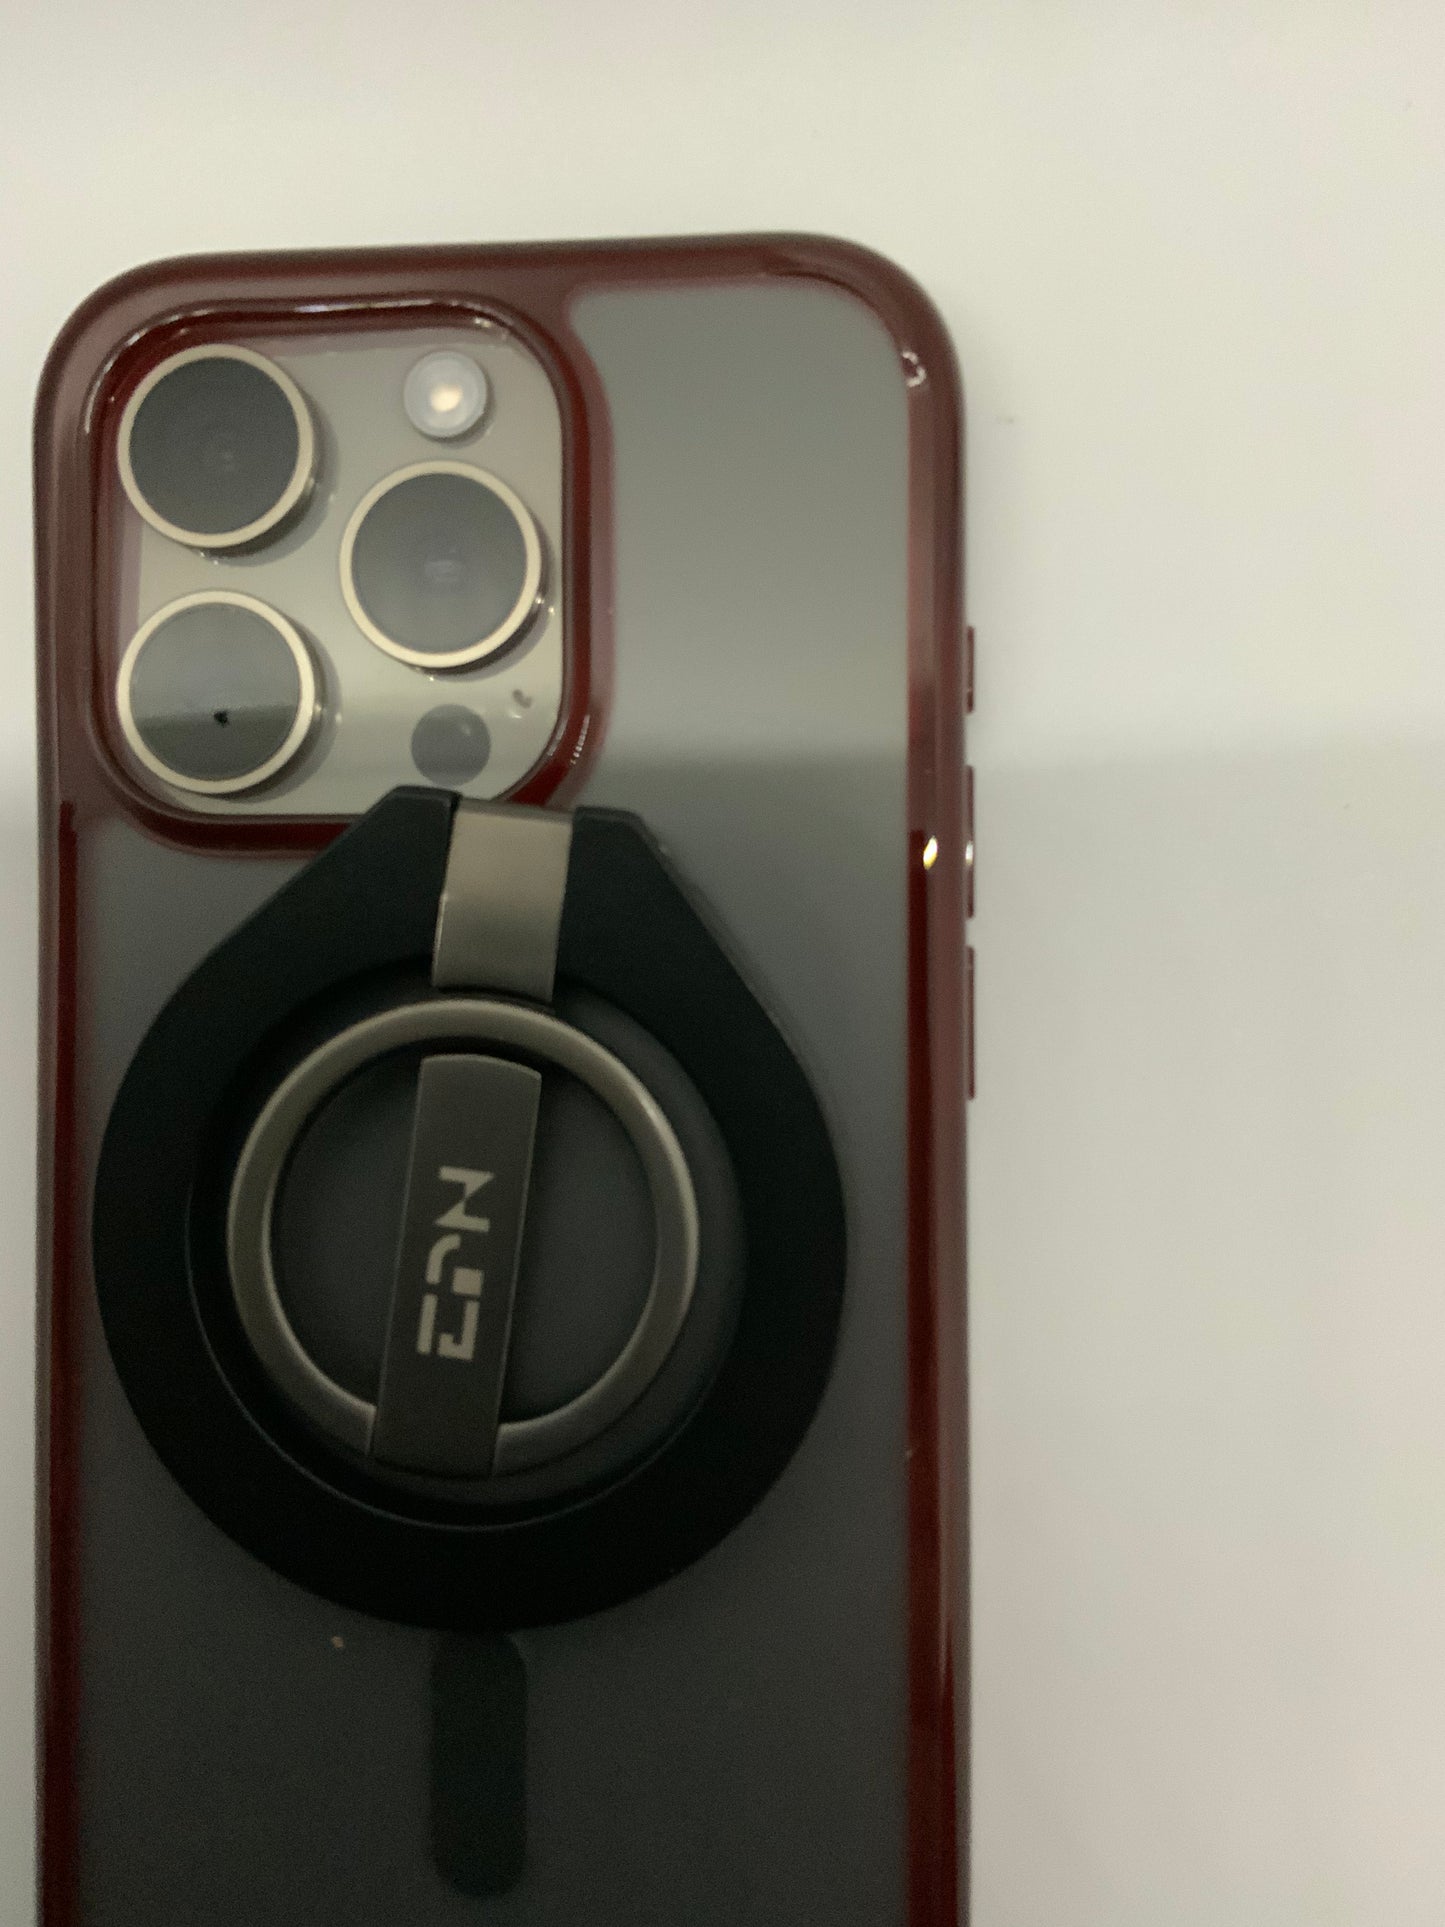 Be My AI: The picture shows a close-up of the back of a smartphone with a red case. The camera module is visible in the top left corner of the phone. It has three circular lenses and a flash arranged in a square shape. Below the camera module, there is a black ring holder attached to the phone case. The ring holder has a silver-colored metal ring and a base with the letters "NCL" written on it. The background is plain white.